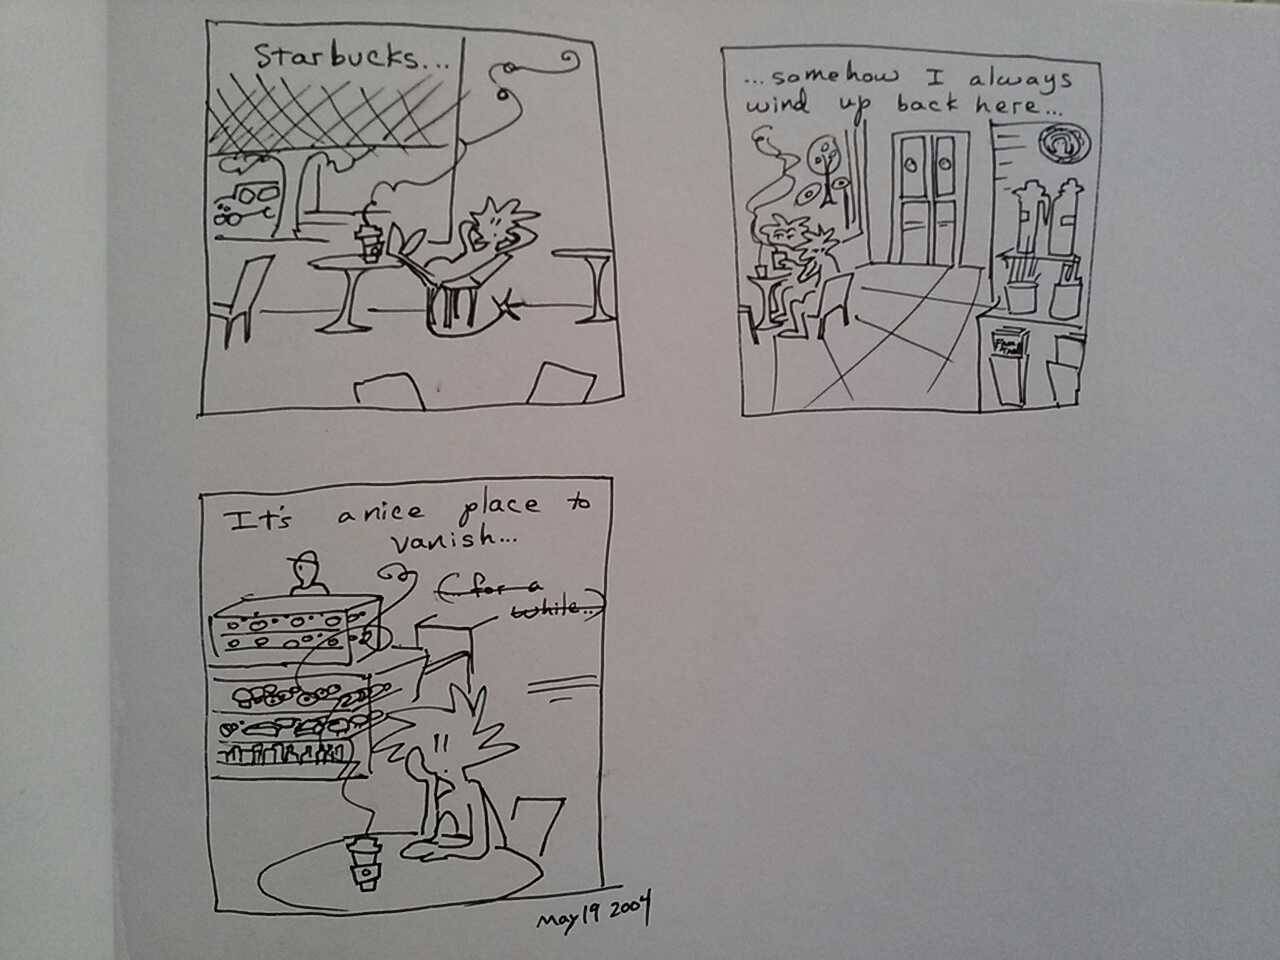 A comic from a much more troubled time: 2004, when i was still not long after graduating and quite lost in the world